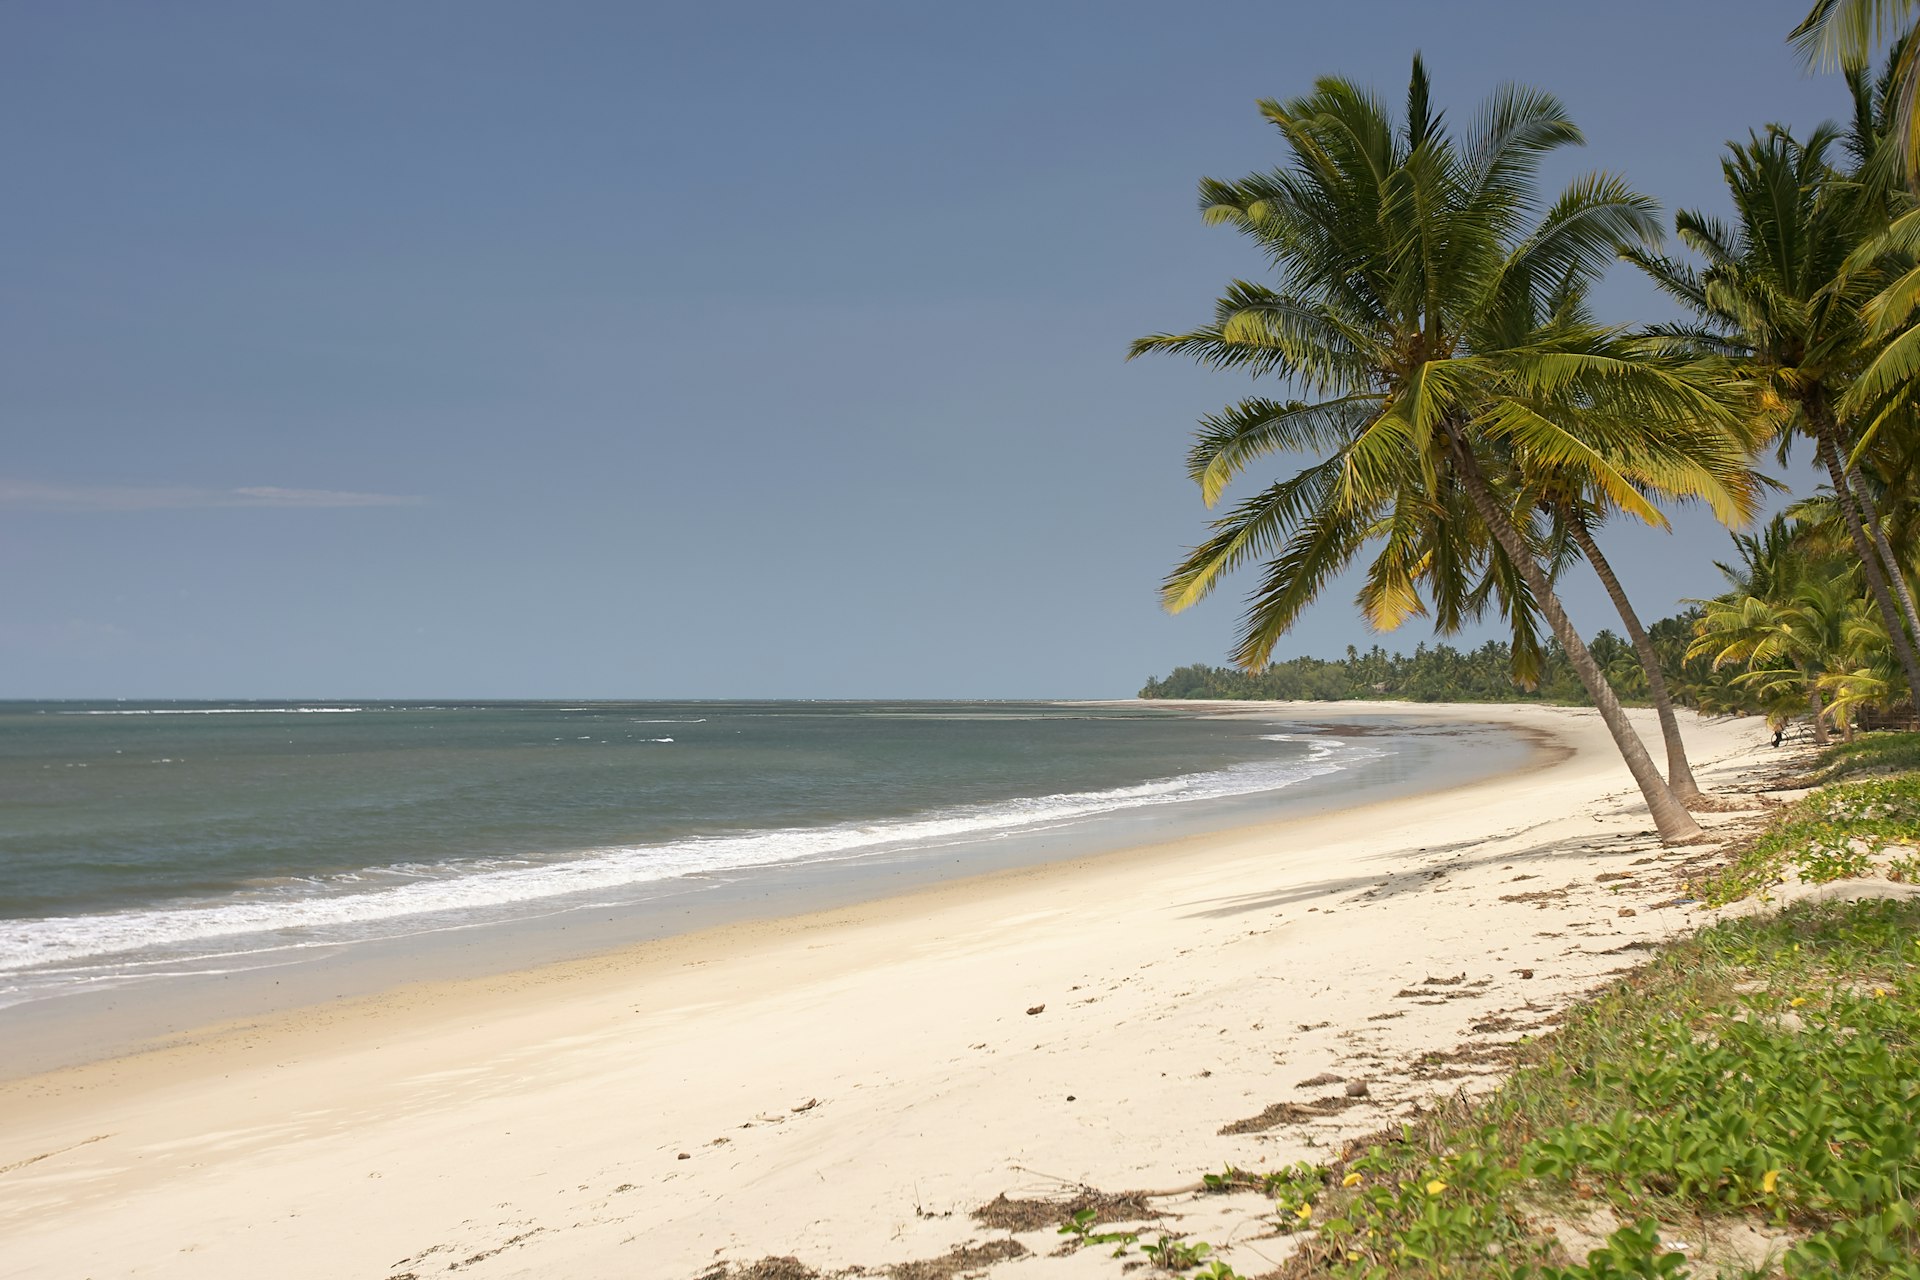 A white-sand beach backed by palm trees